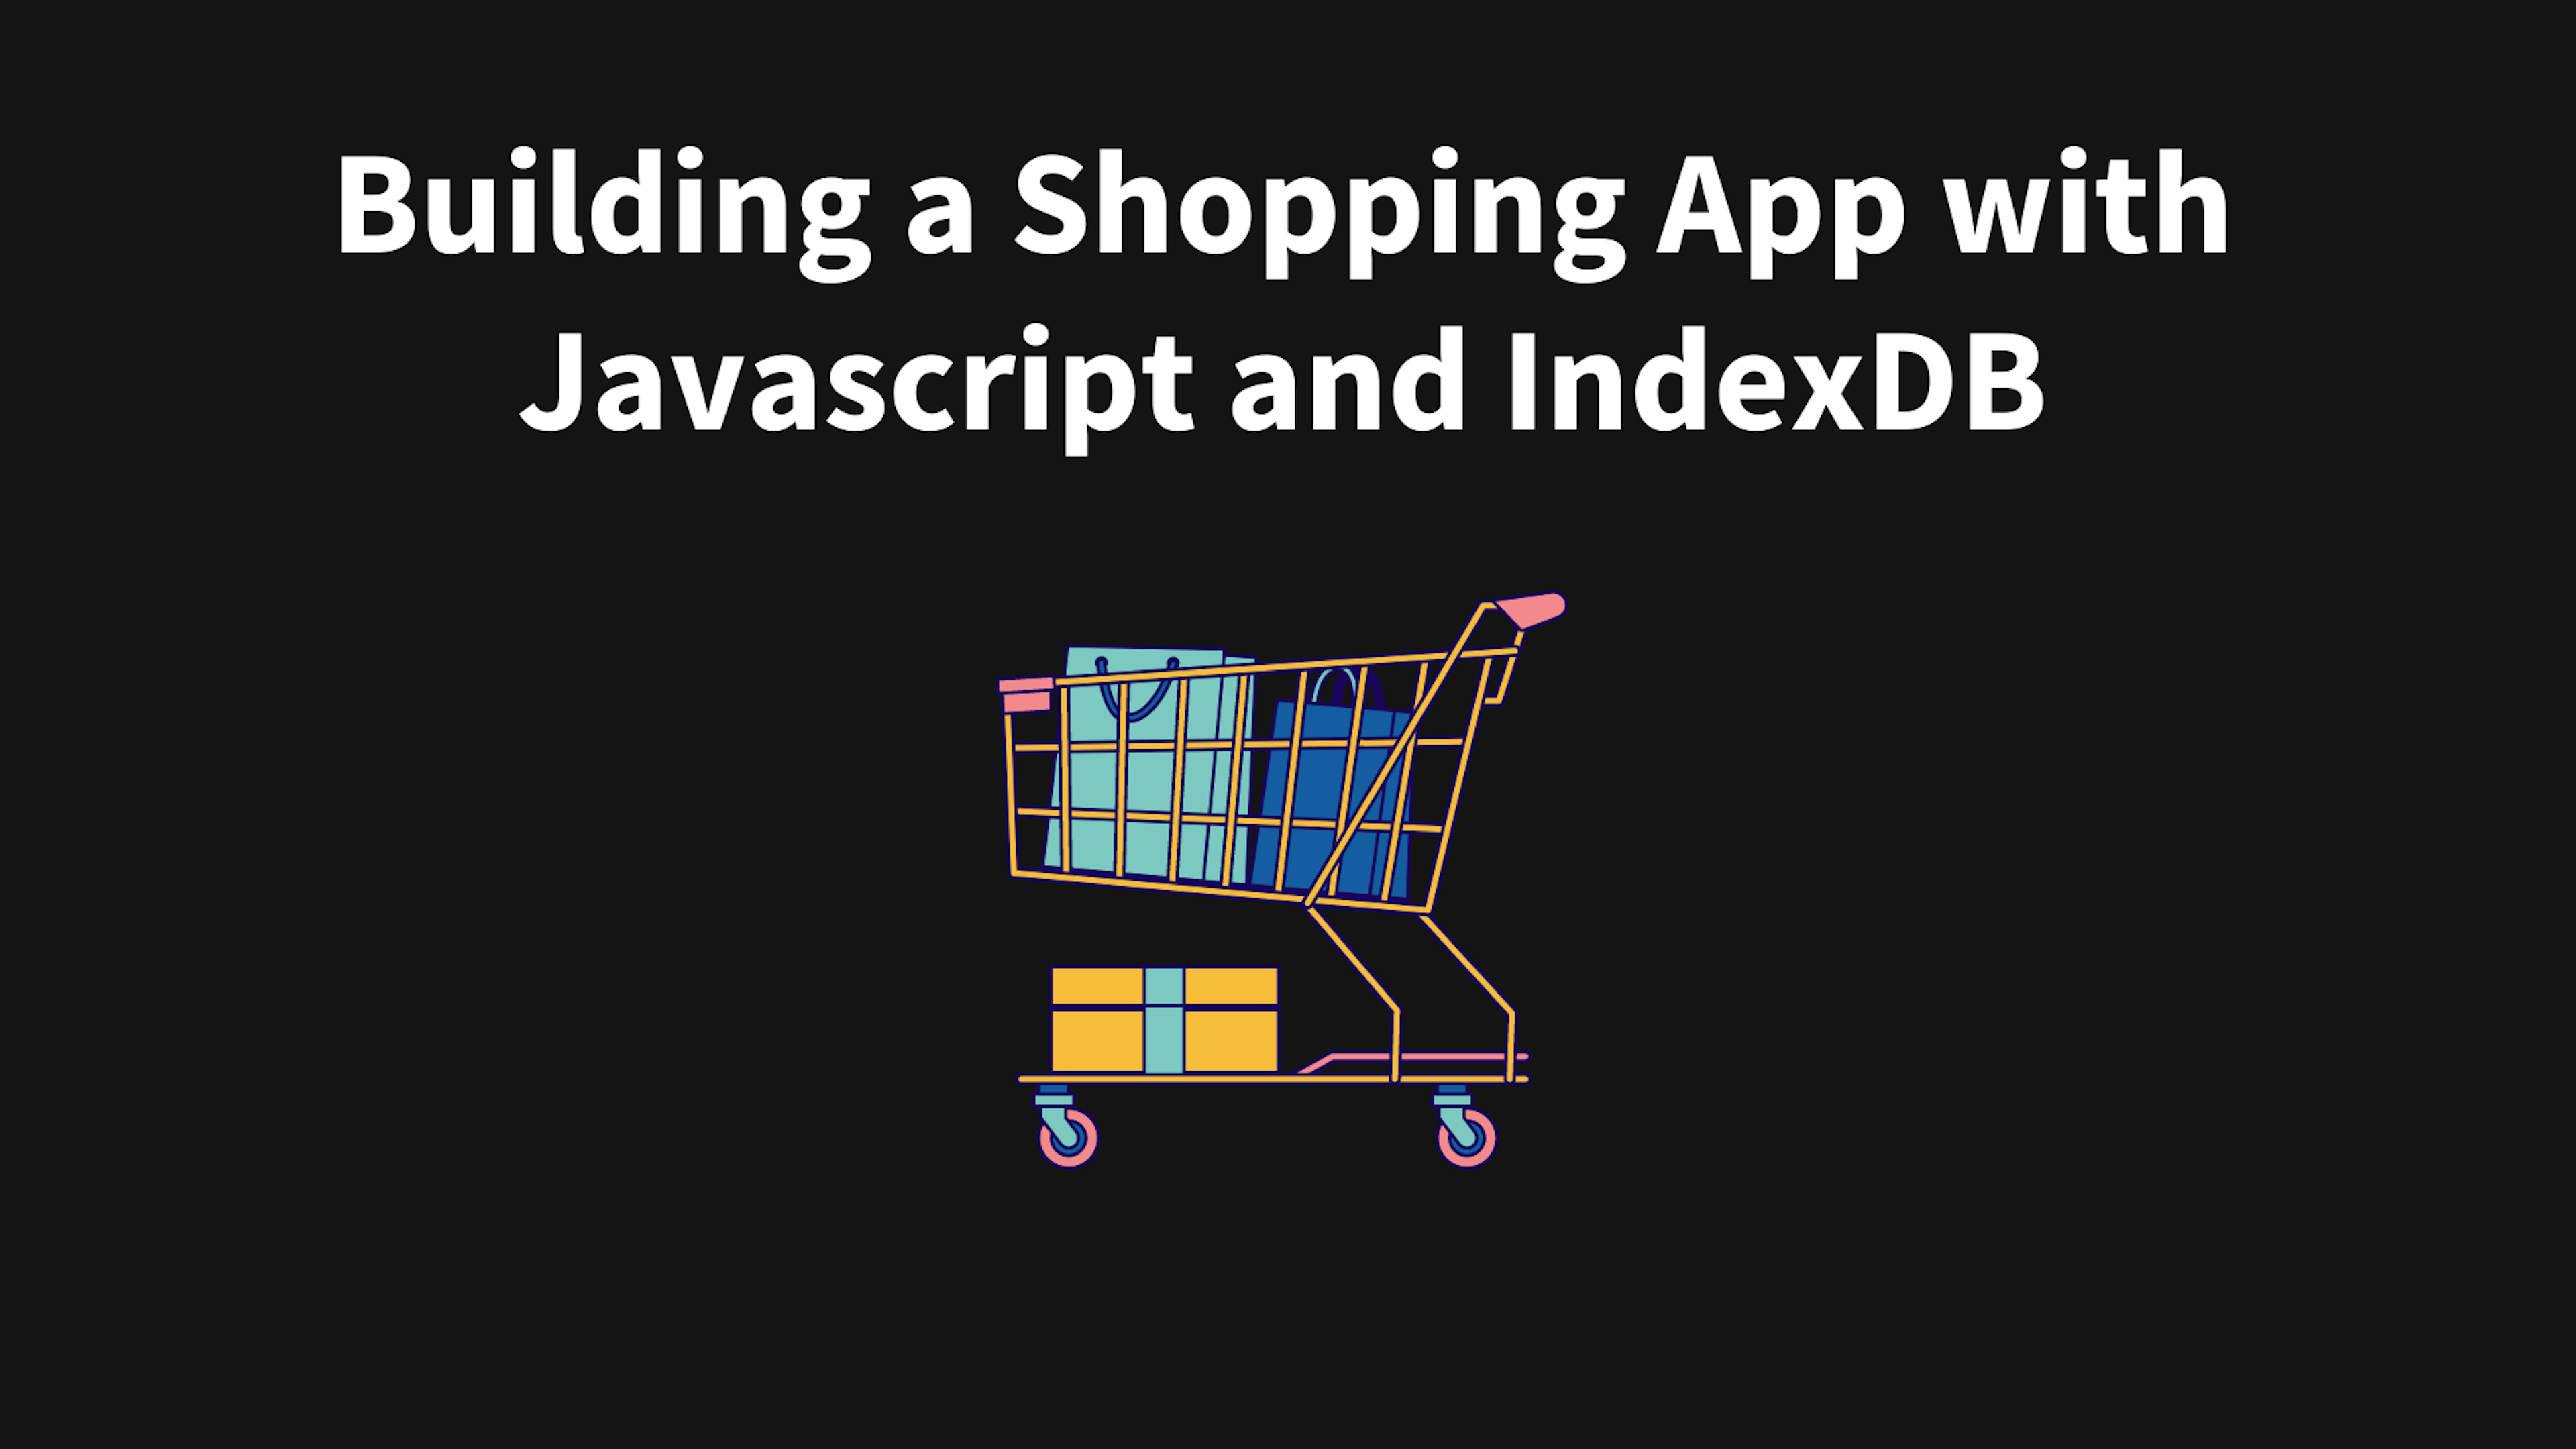 Building a Shopping App with Javascript and IndexDB